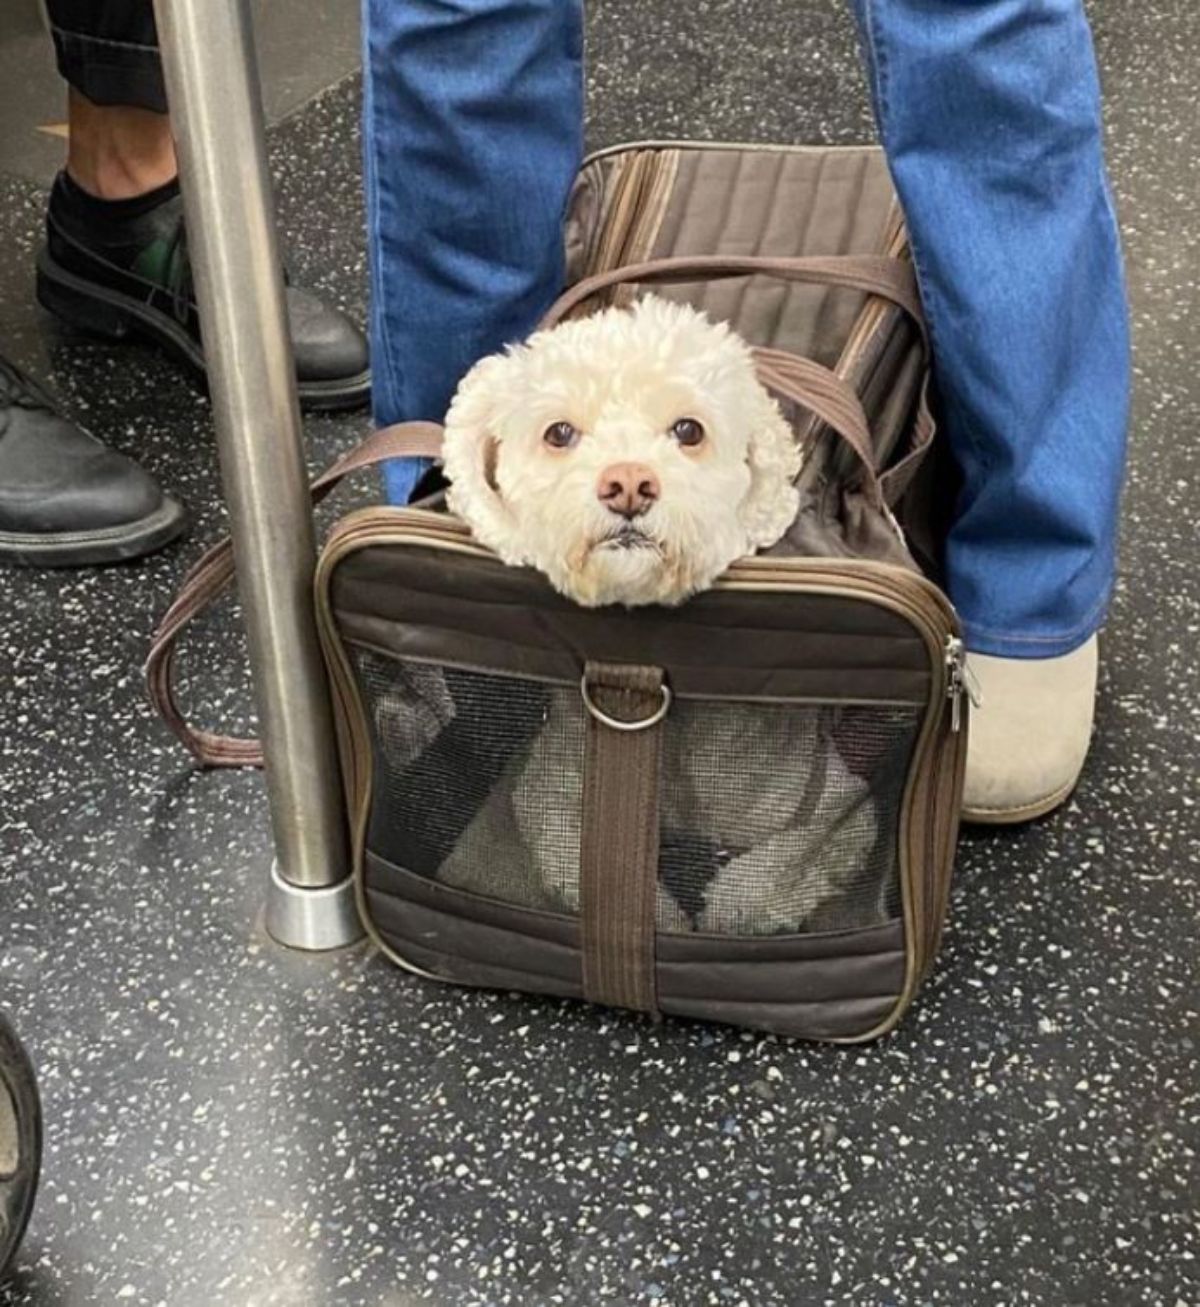 fluffy white dog in a brown bag with its head sticking out with the bag on the floor between someone's feet